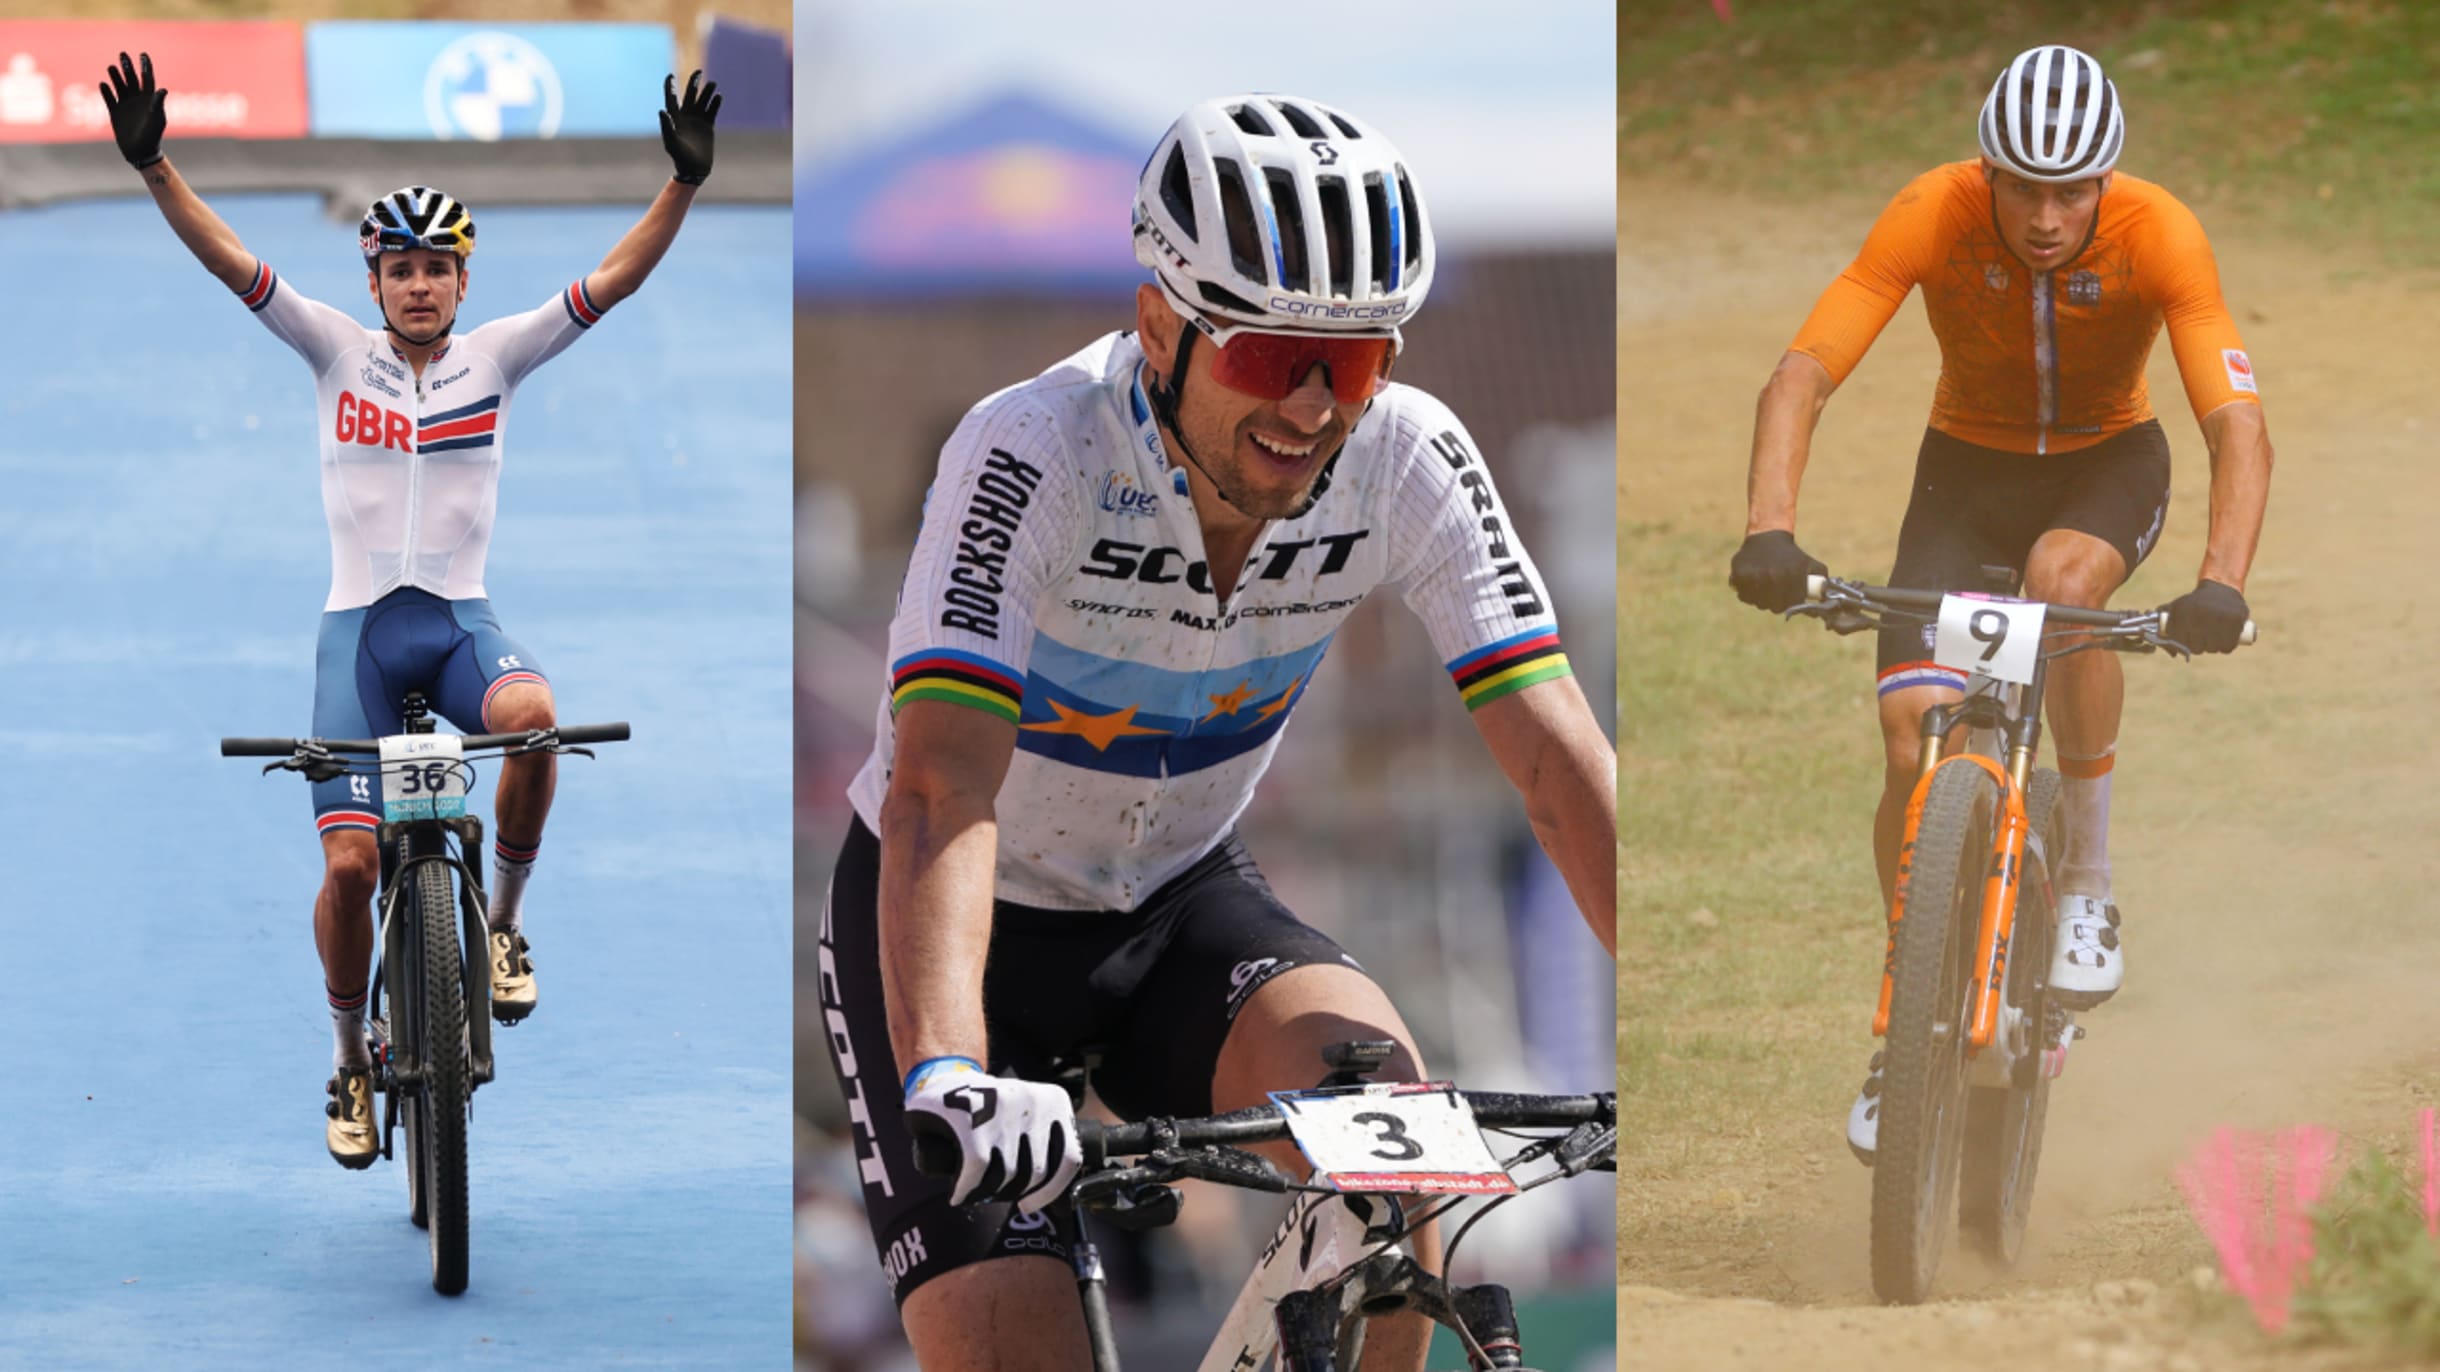 2023 UCI Cycling World Championships Tom Pidcock, Nino Schurter, and Mathieu van der Poel aiming for historic wins in mountain bike cross-country race